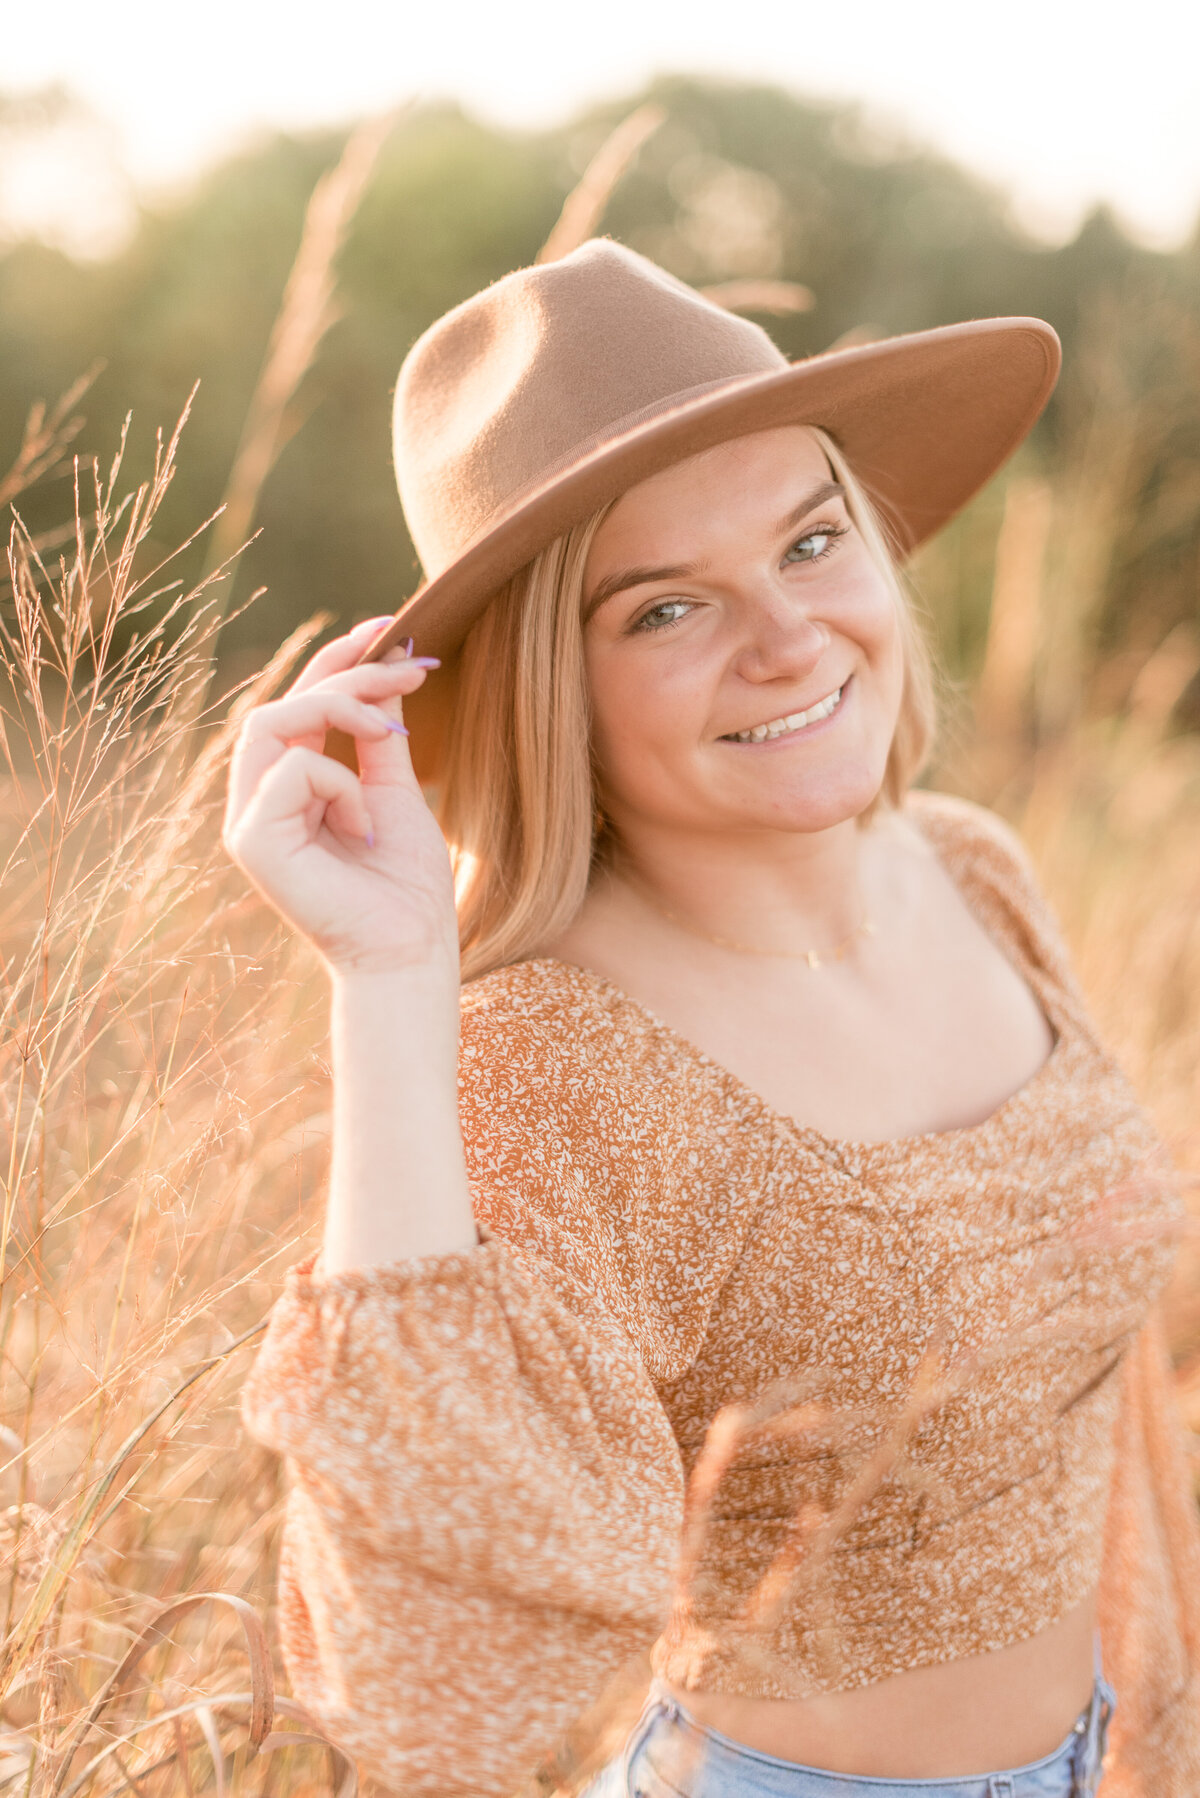 Senior girl smiling at camera with right hand on trendy hat brim on sunny day in Lancaster, Pennsylvania.